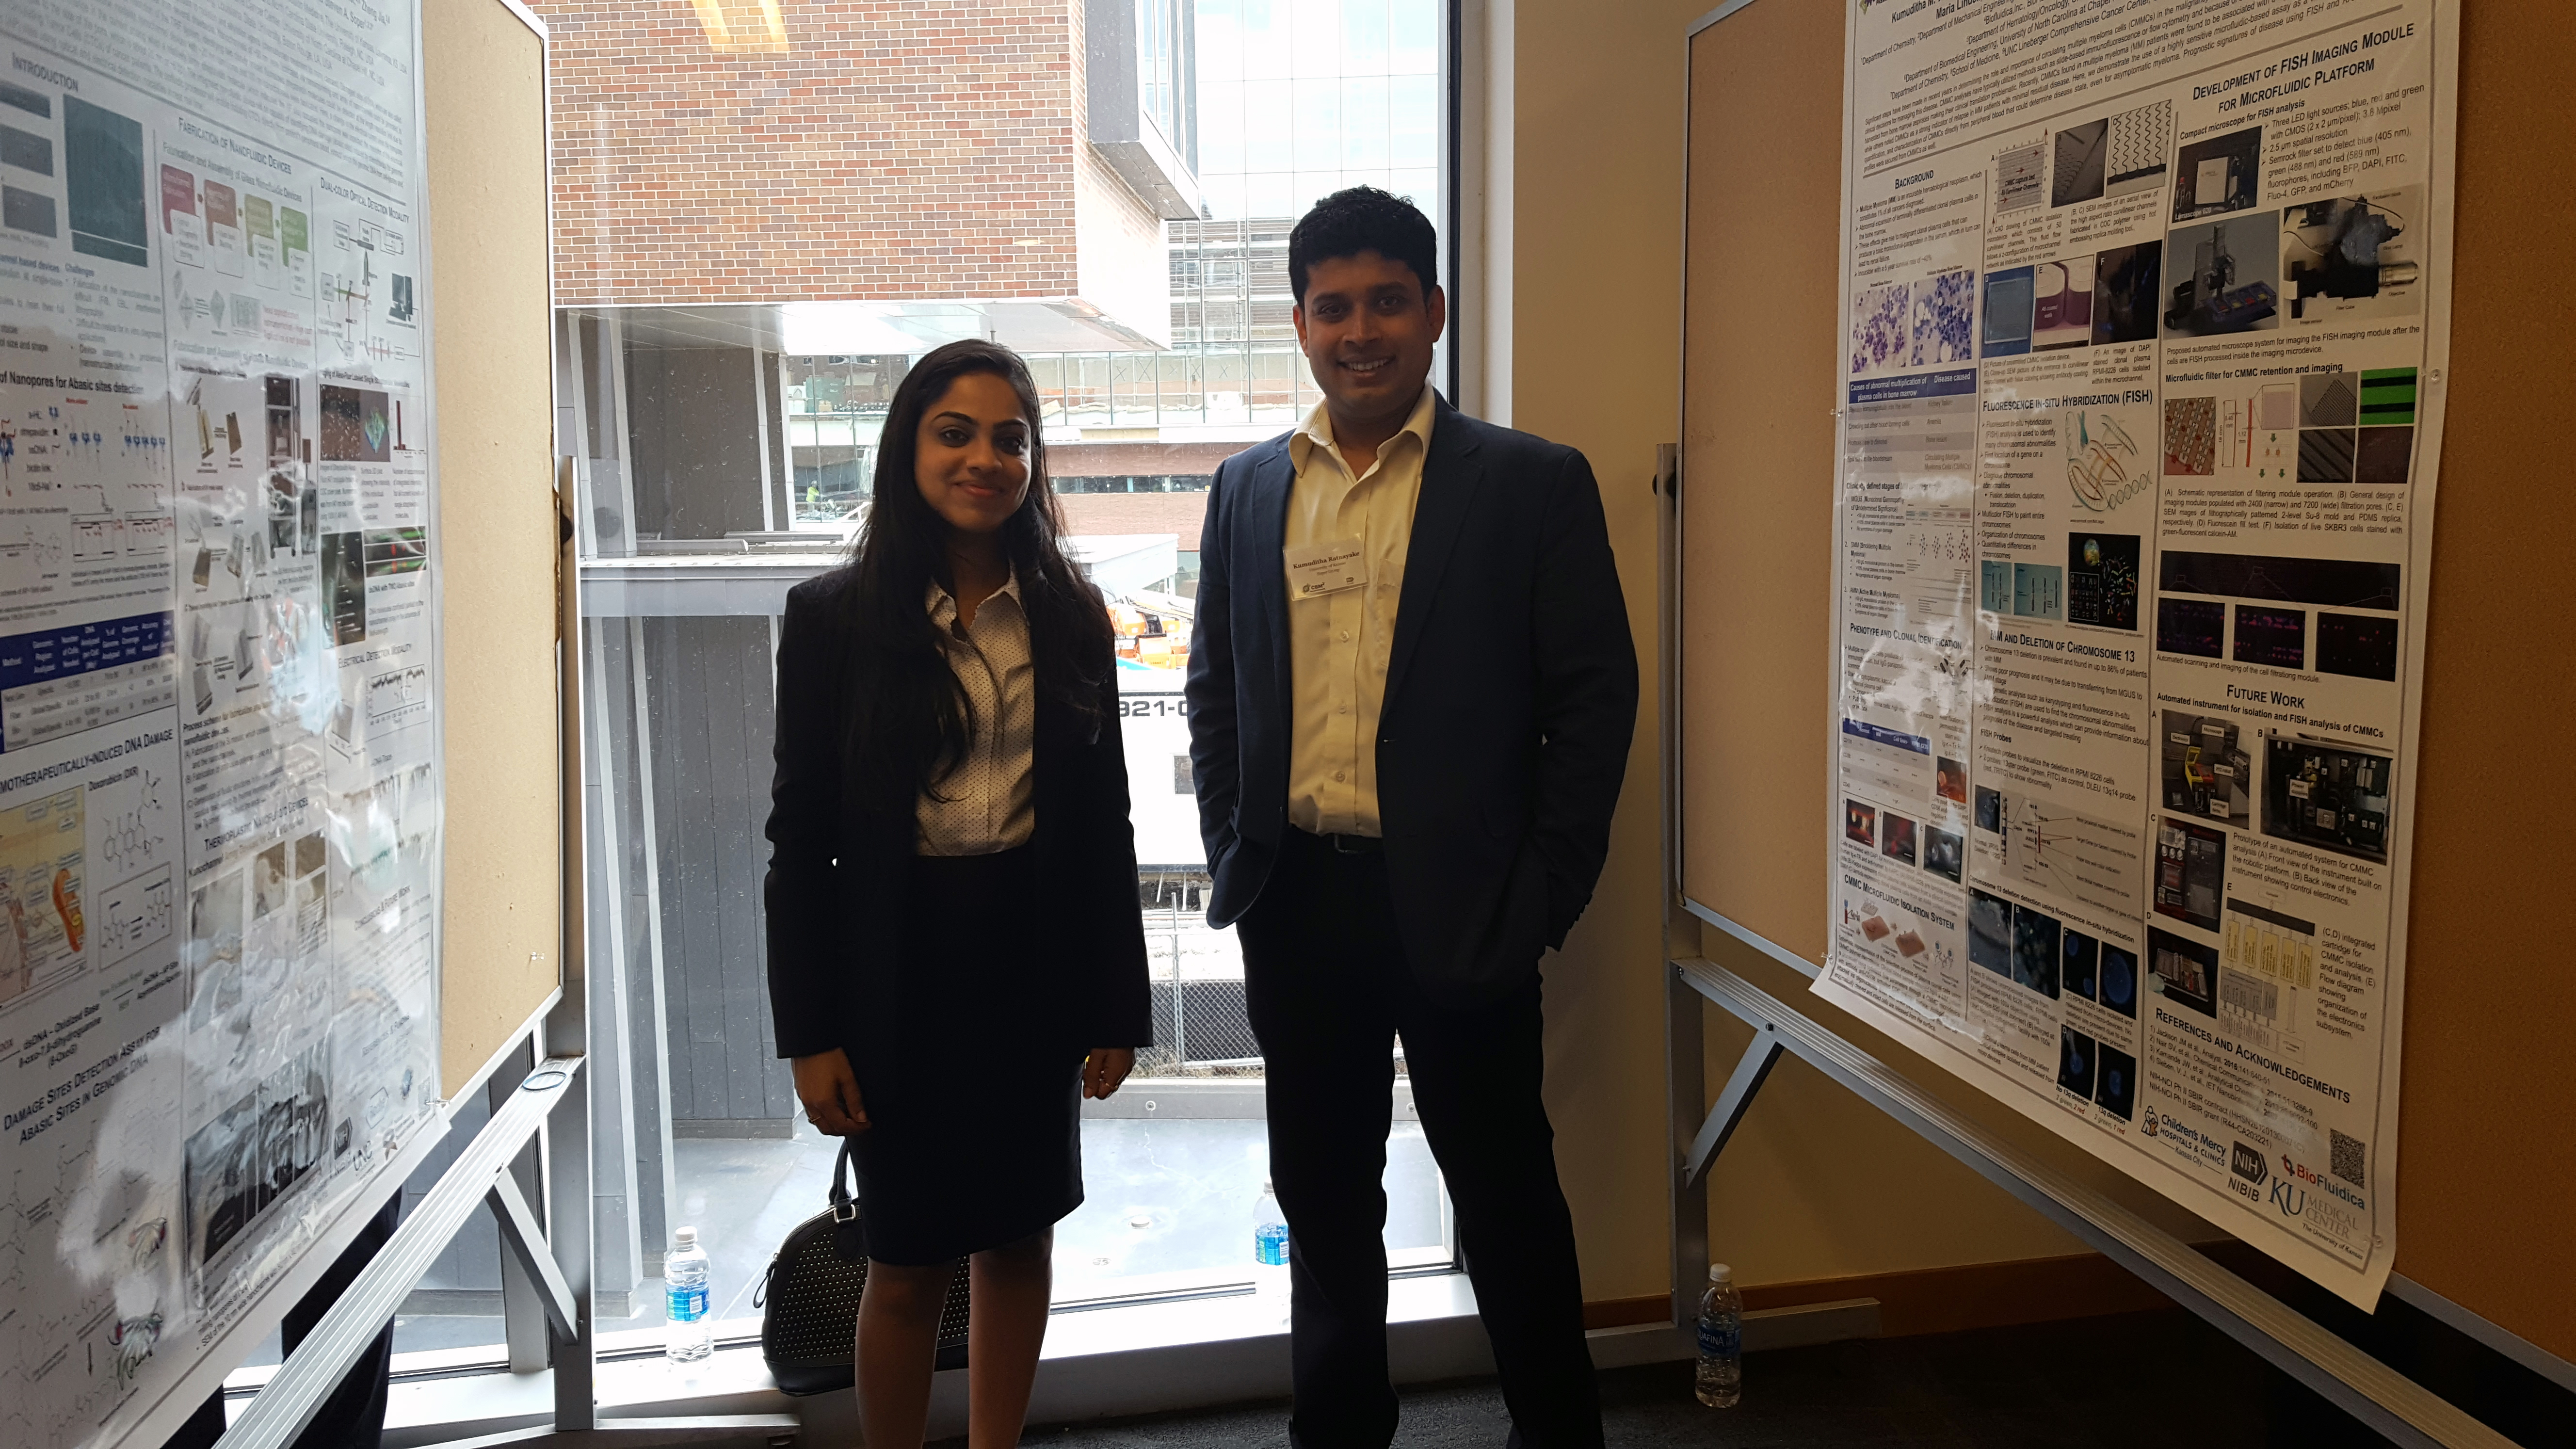 Two people standing by research posters.